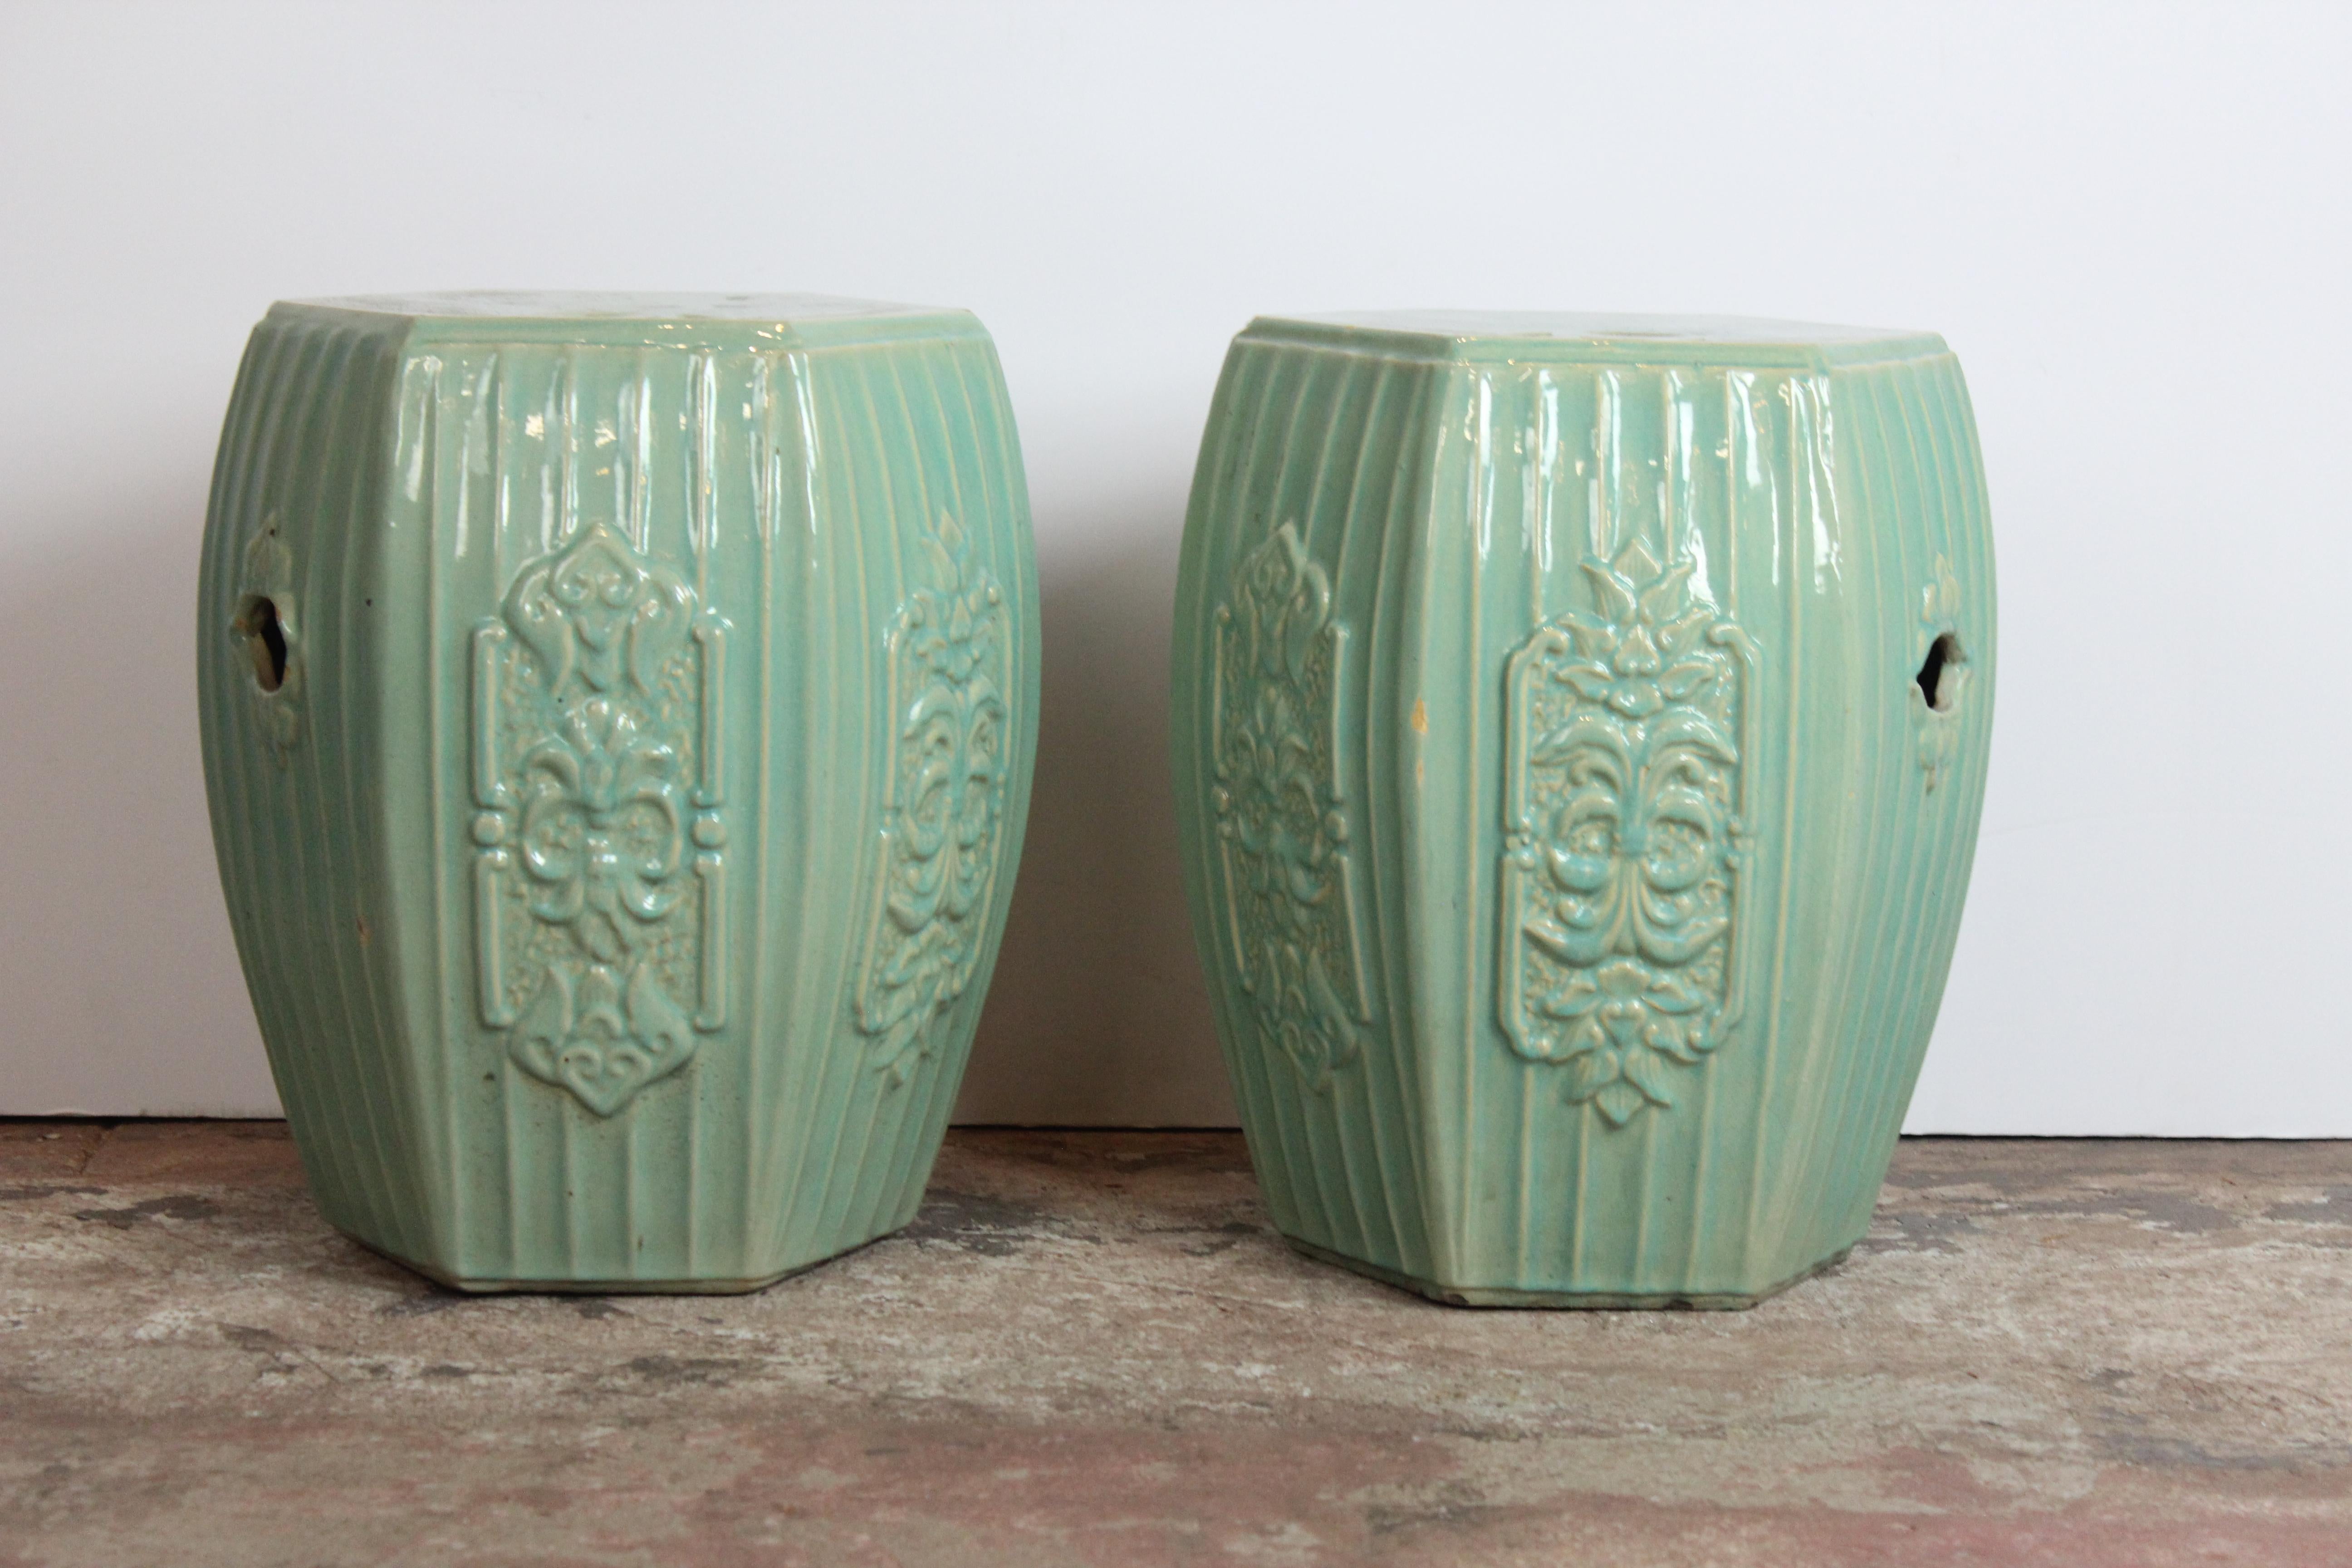 Pair of Asian hand-painted garden stools.